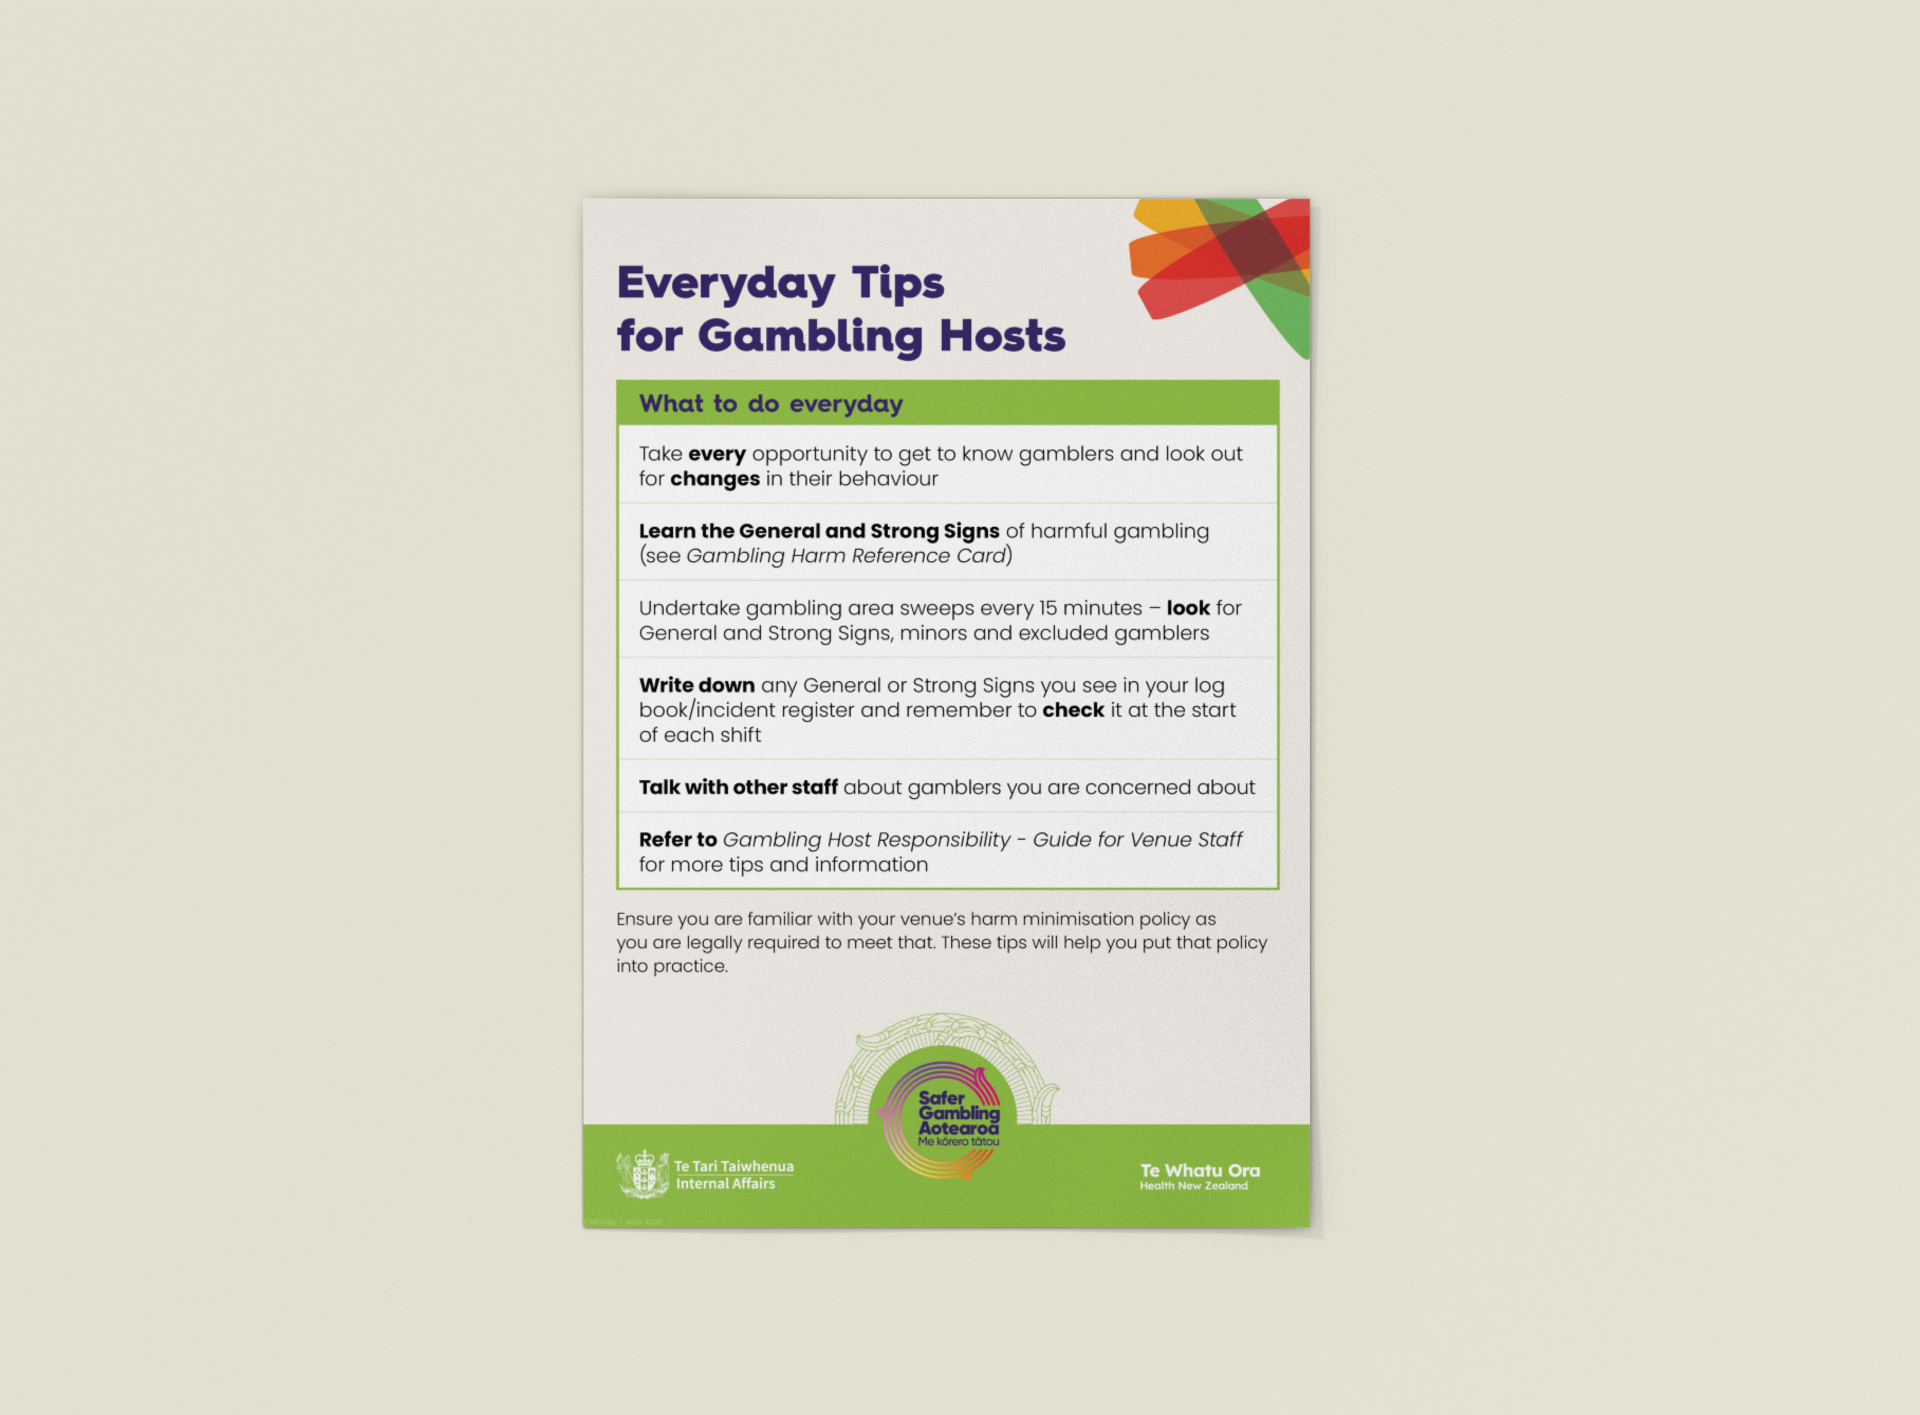 Everyday Tips for Gambling Hosts - A4 Laminated Card